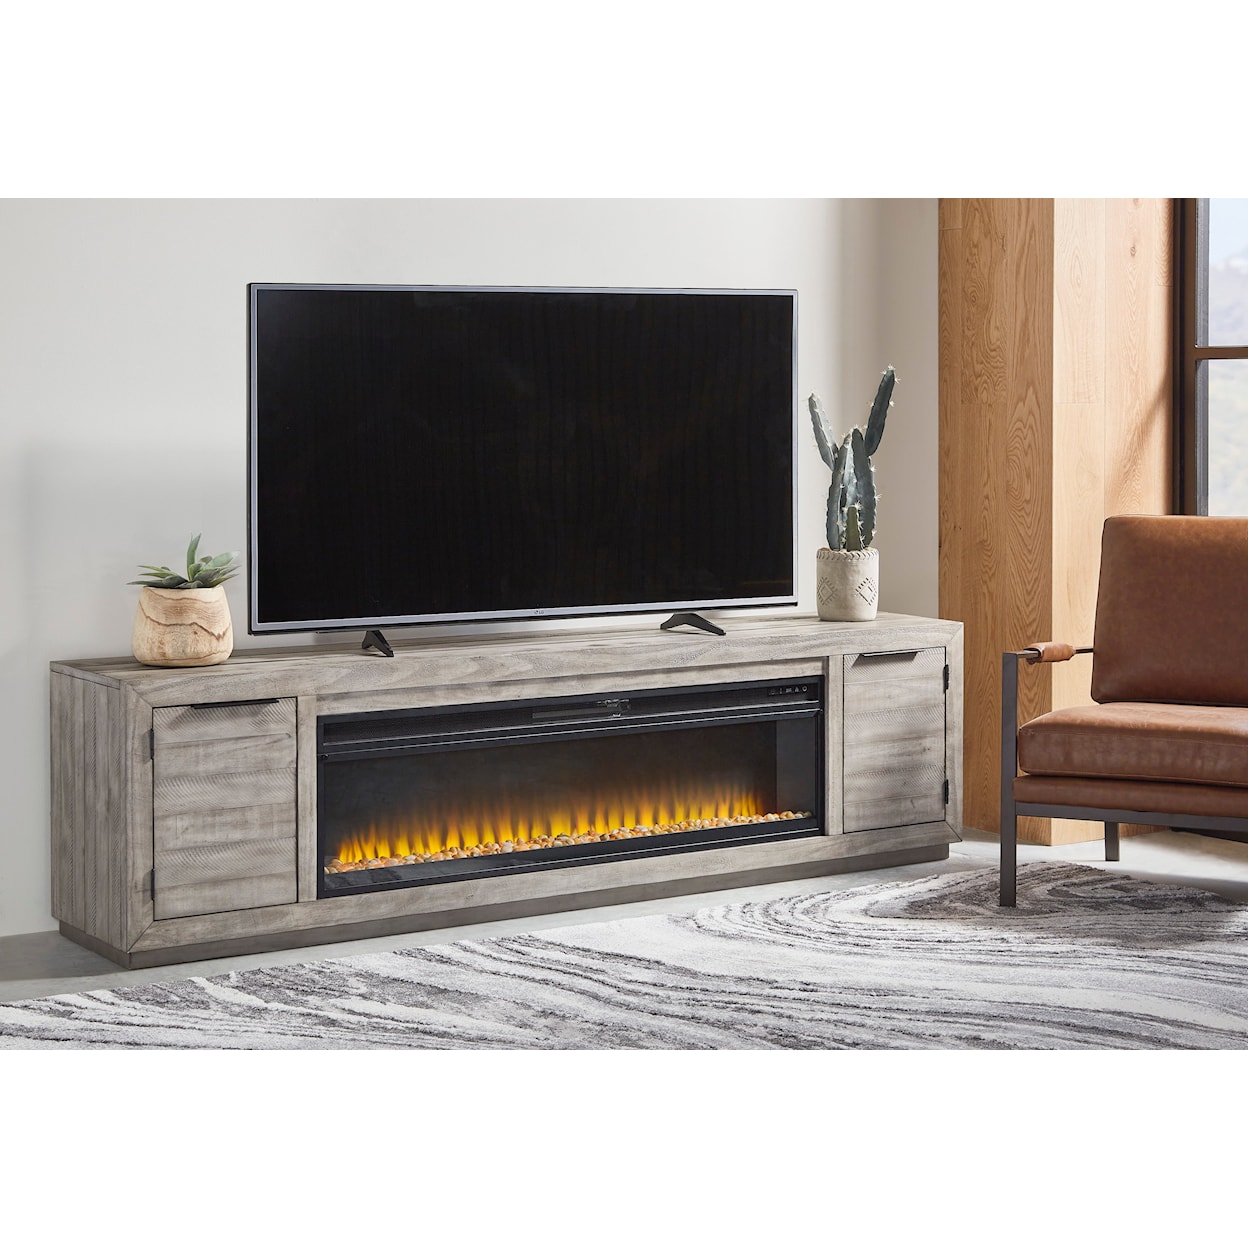 Ashley Furniture Signature Design Naydell 92" TV Stand with Electric Fireplace